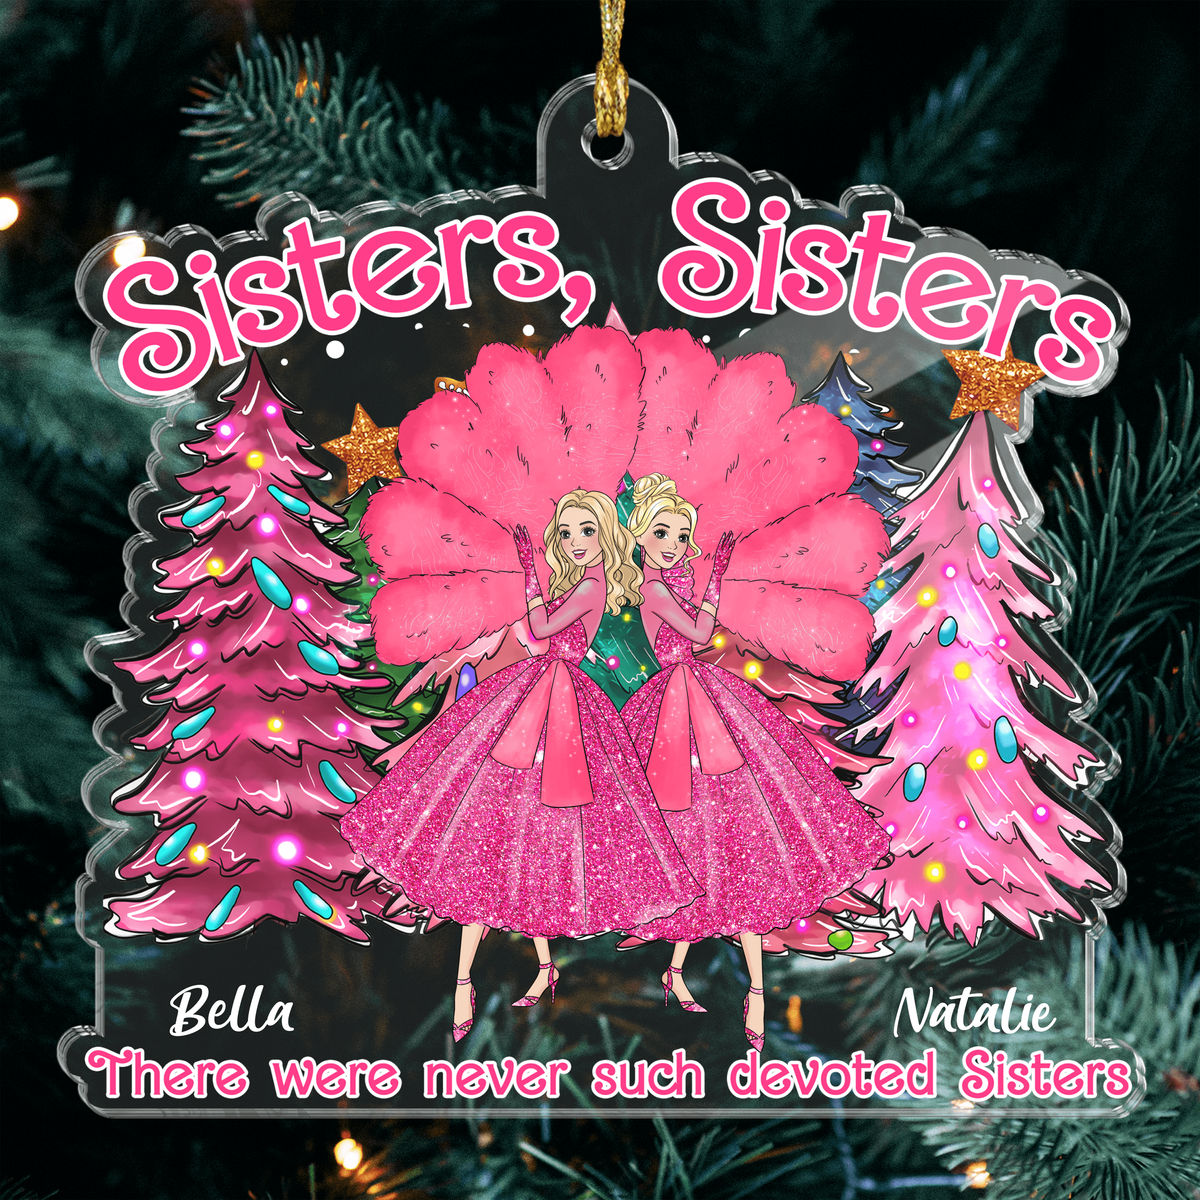 Personalized Ornament - Sisters Sisters Vintage (58136)